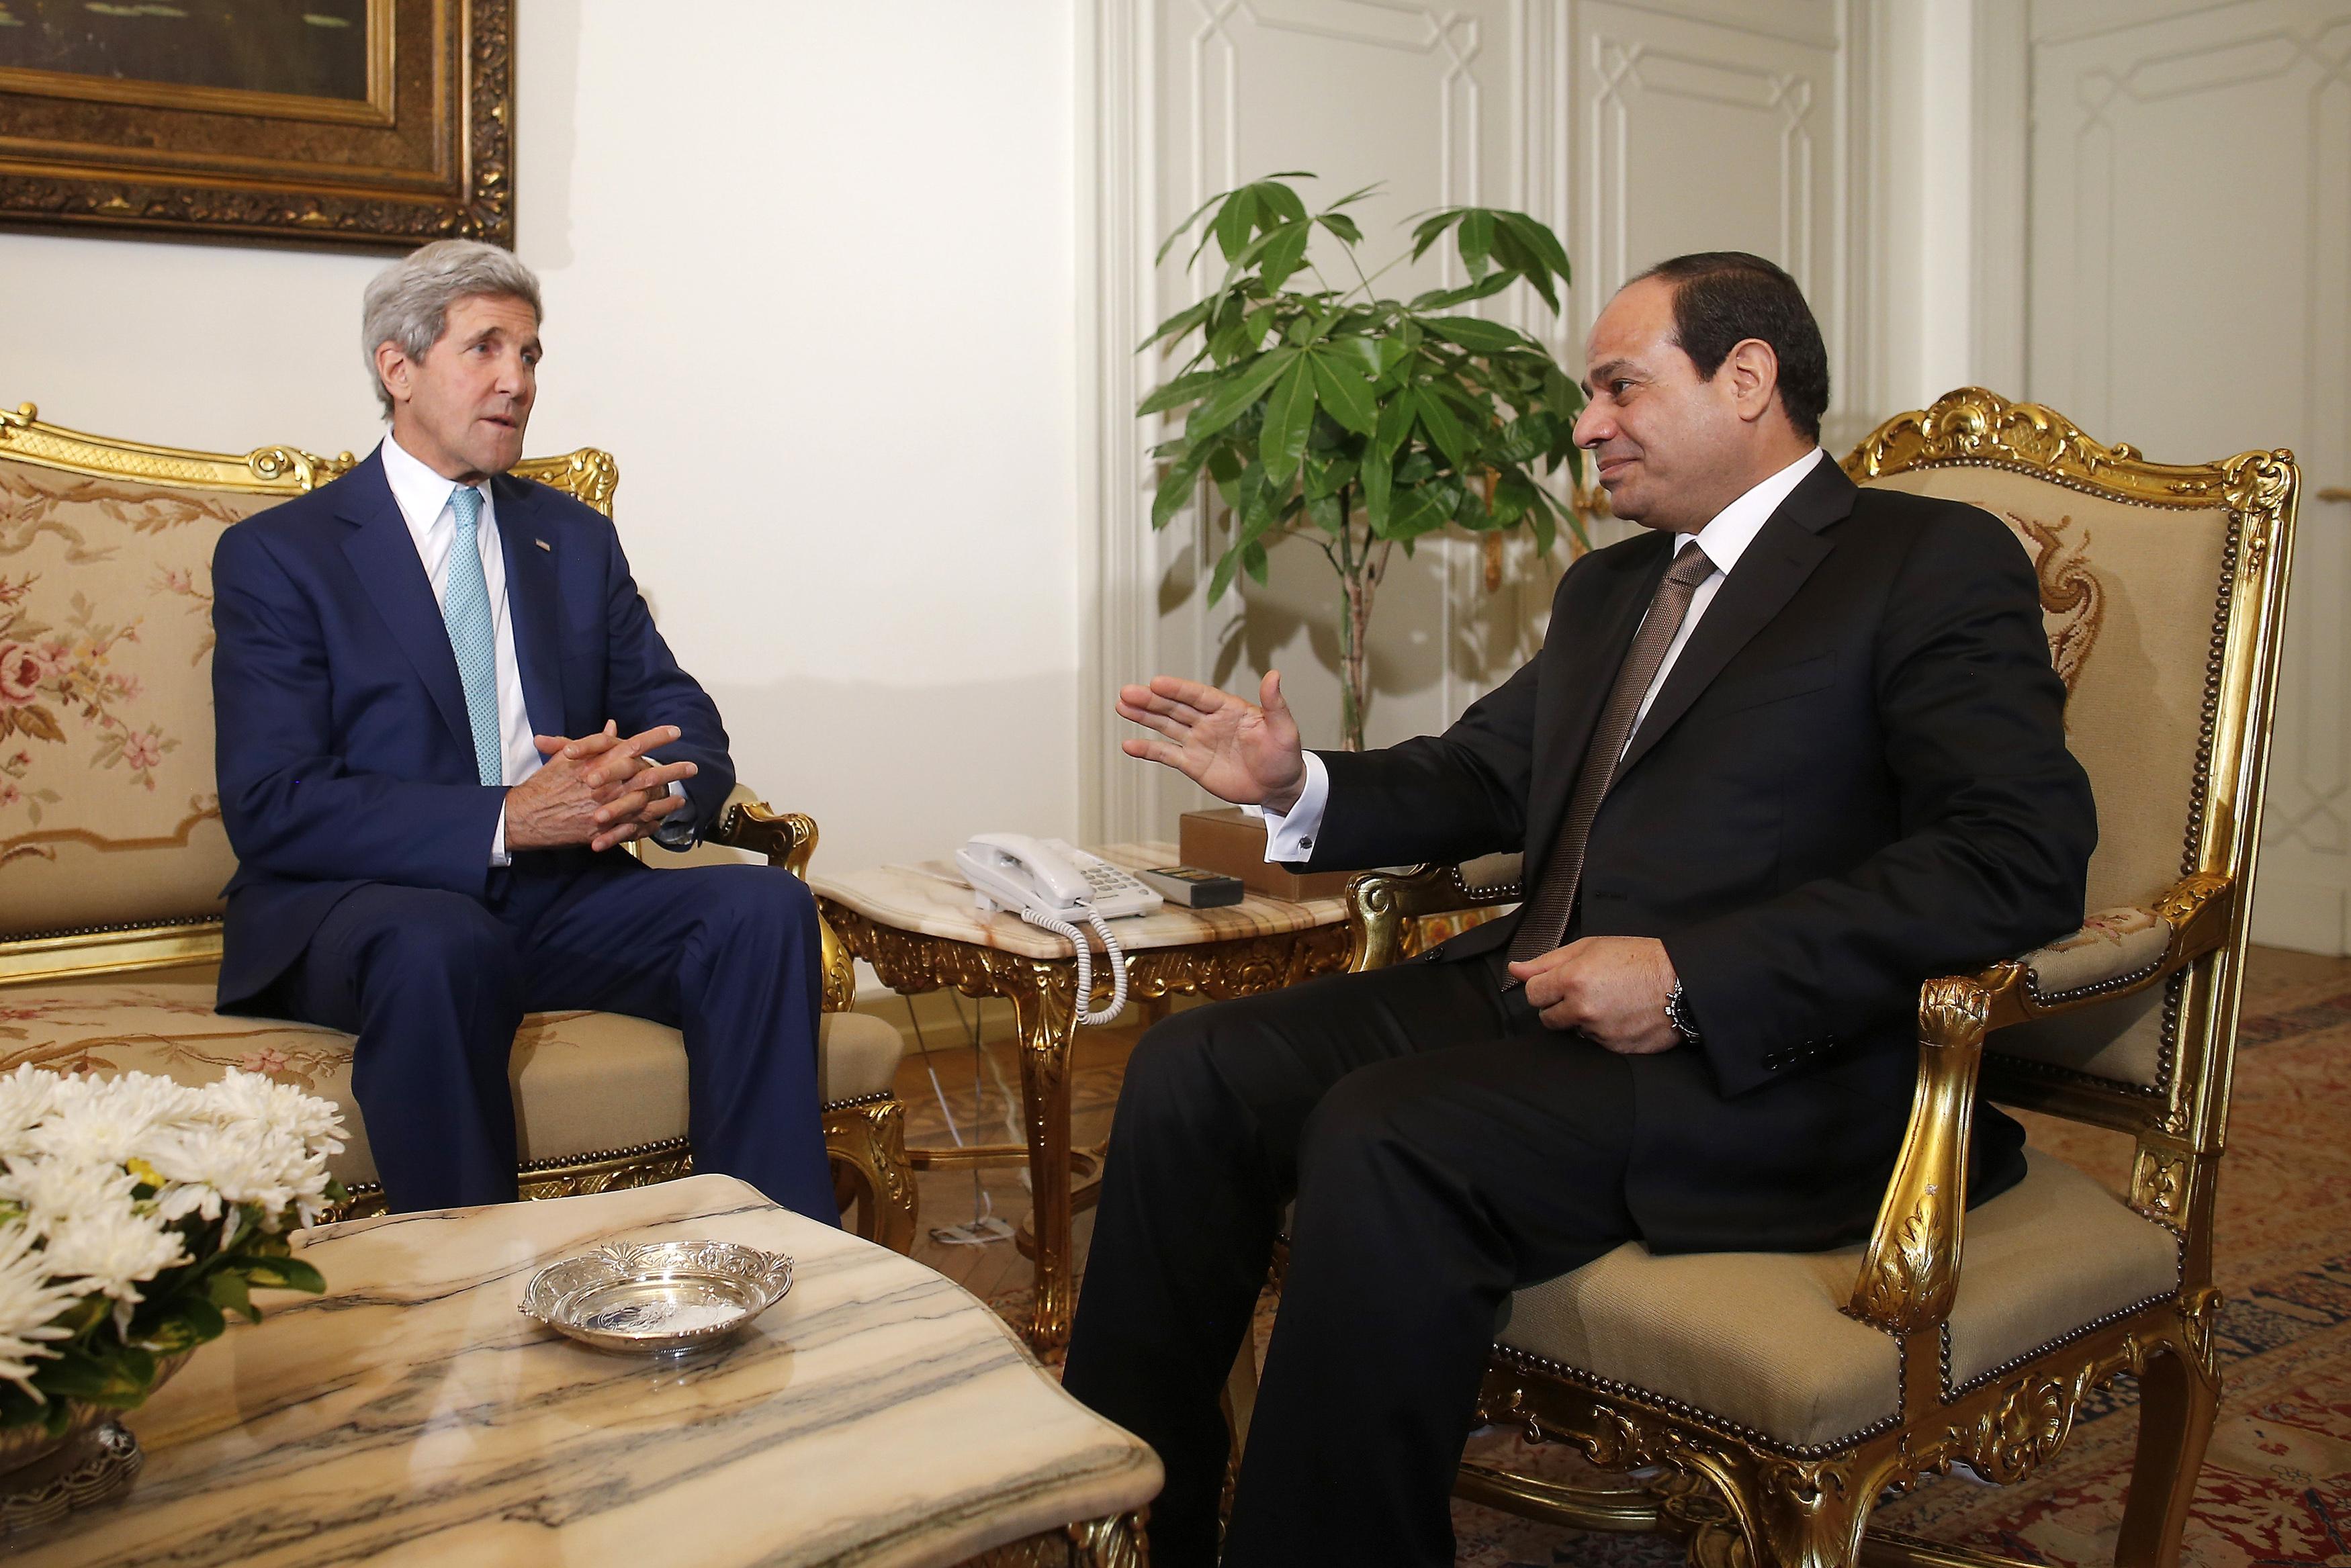 Kerry, Aides Screened by Security at Egyptian Presidential Palace